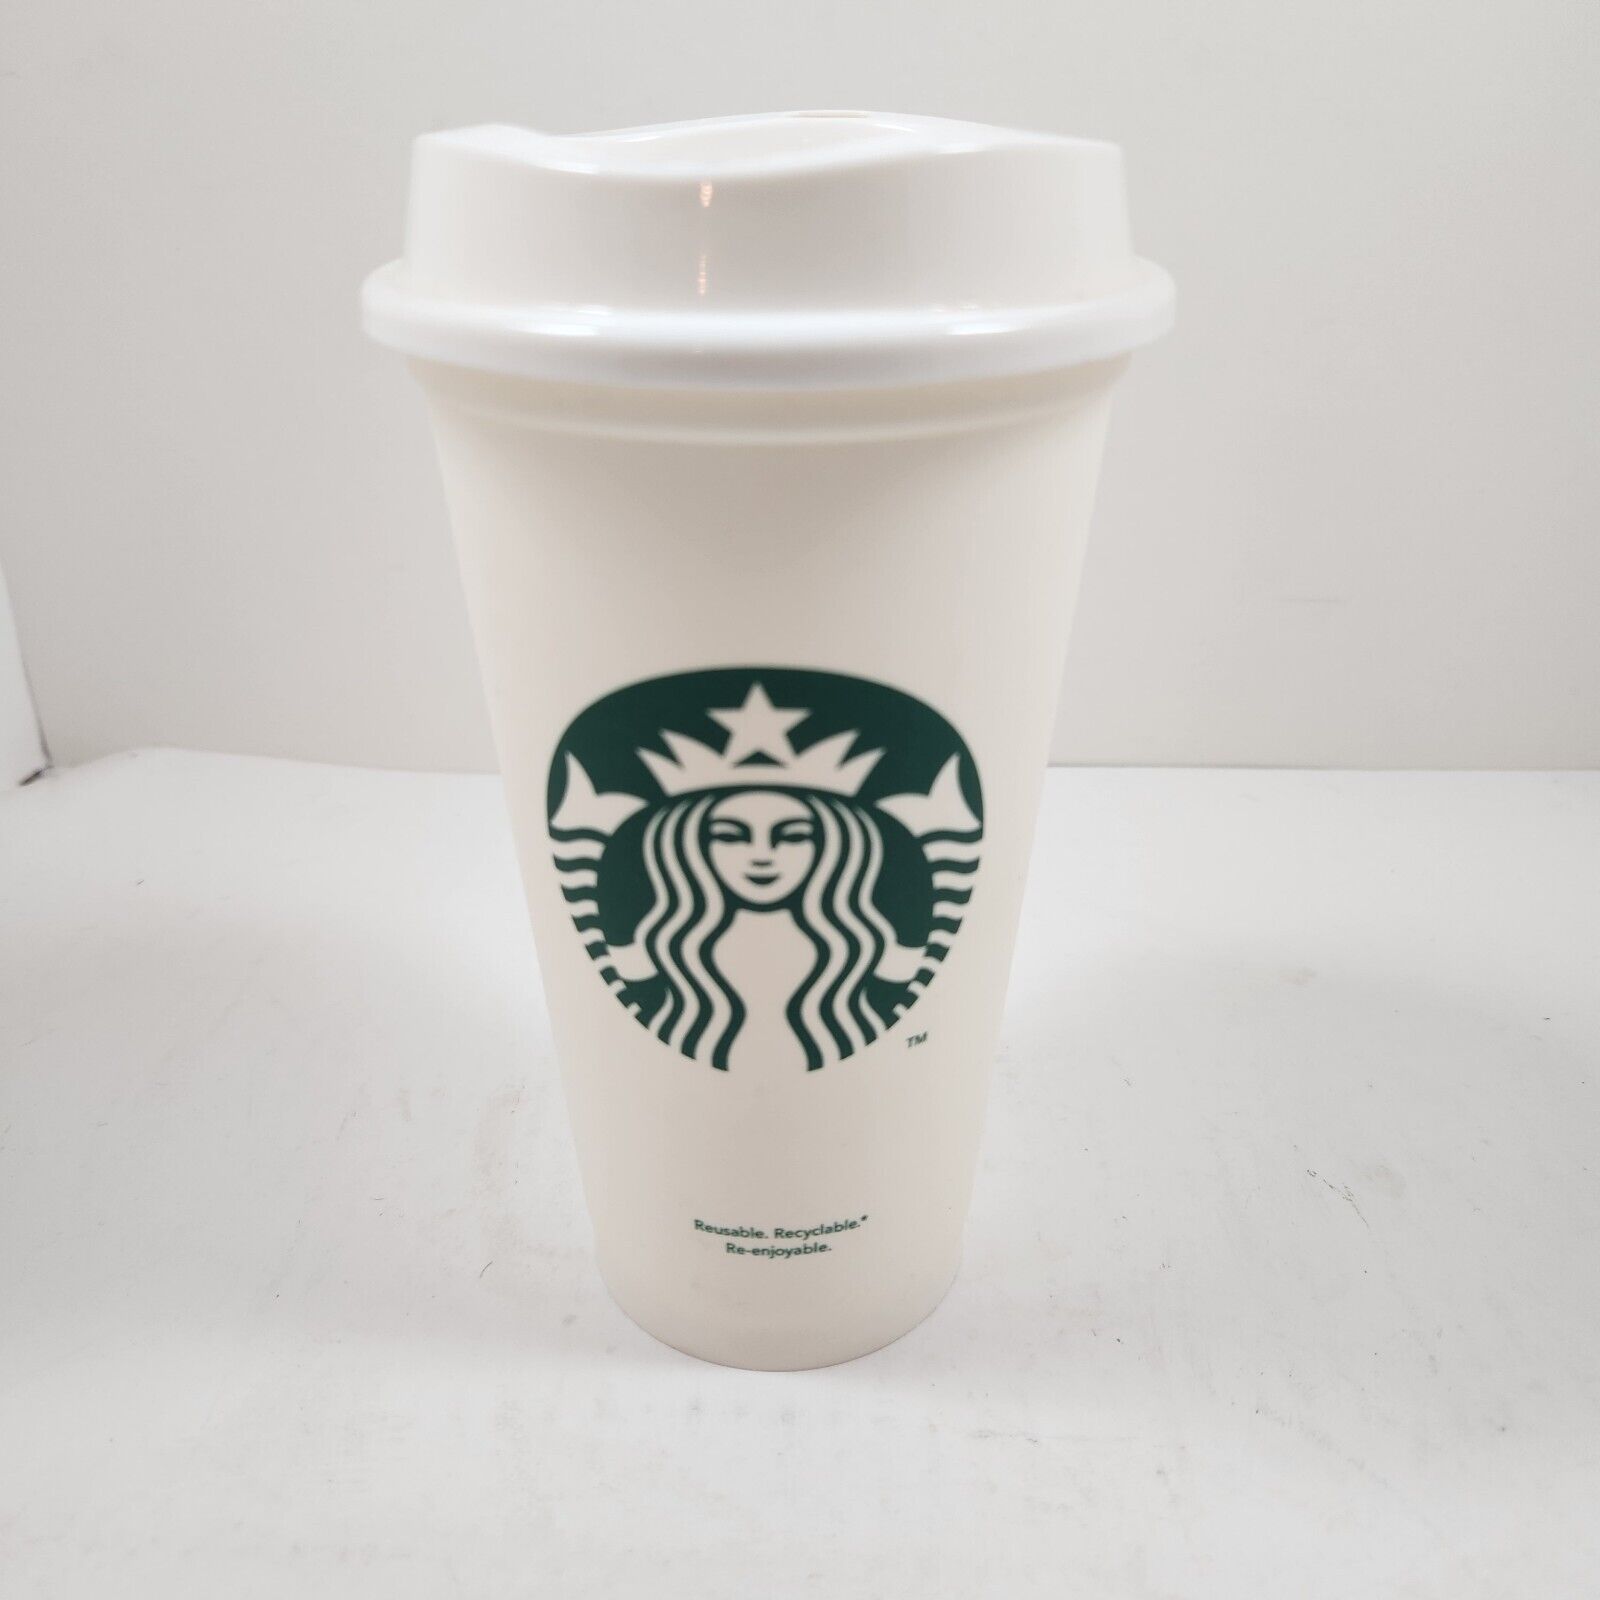 Starbucks 2012 White Reusable Recyclable Cup with Lid 16oz 473mL Classic Style